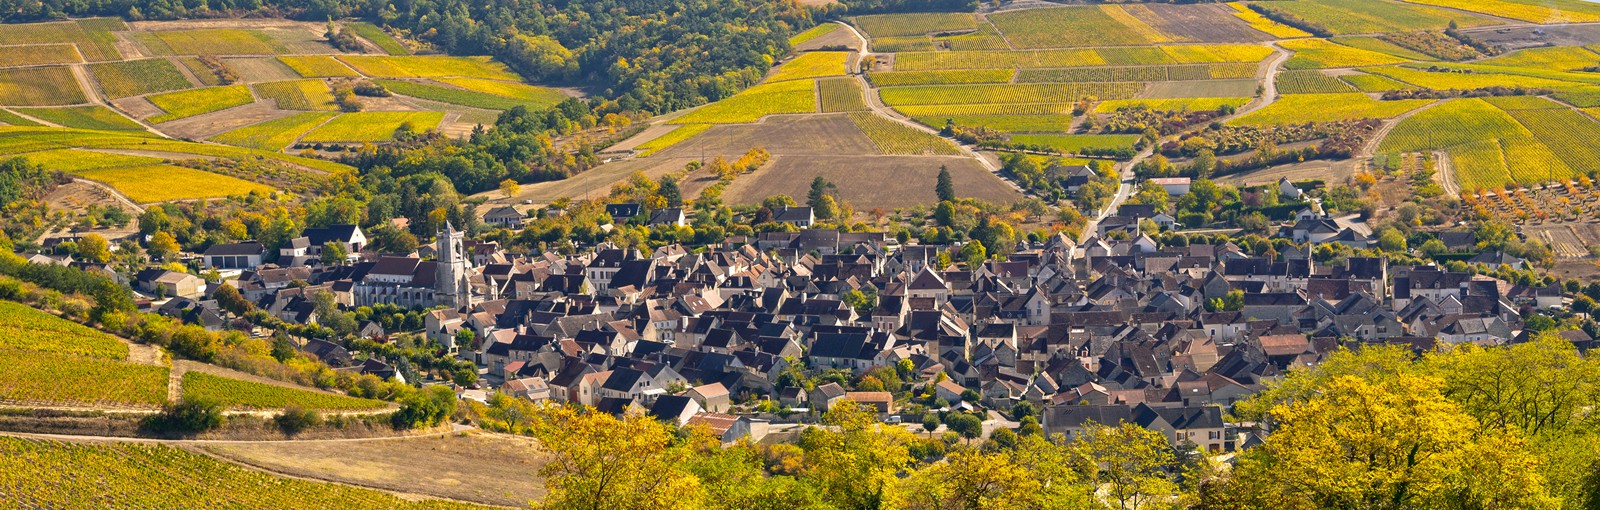 Tours 2 days in Burgundy: Chablis, Beaune, and the 'Grands Crus' wine route' - Burgundy - Multiday tours from Paris